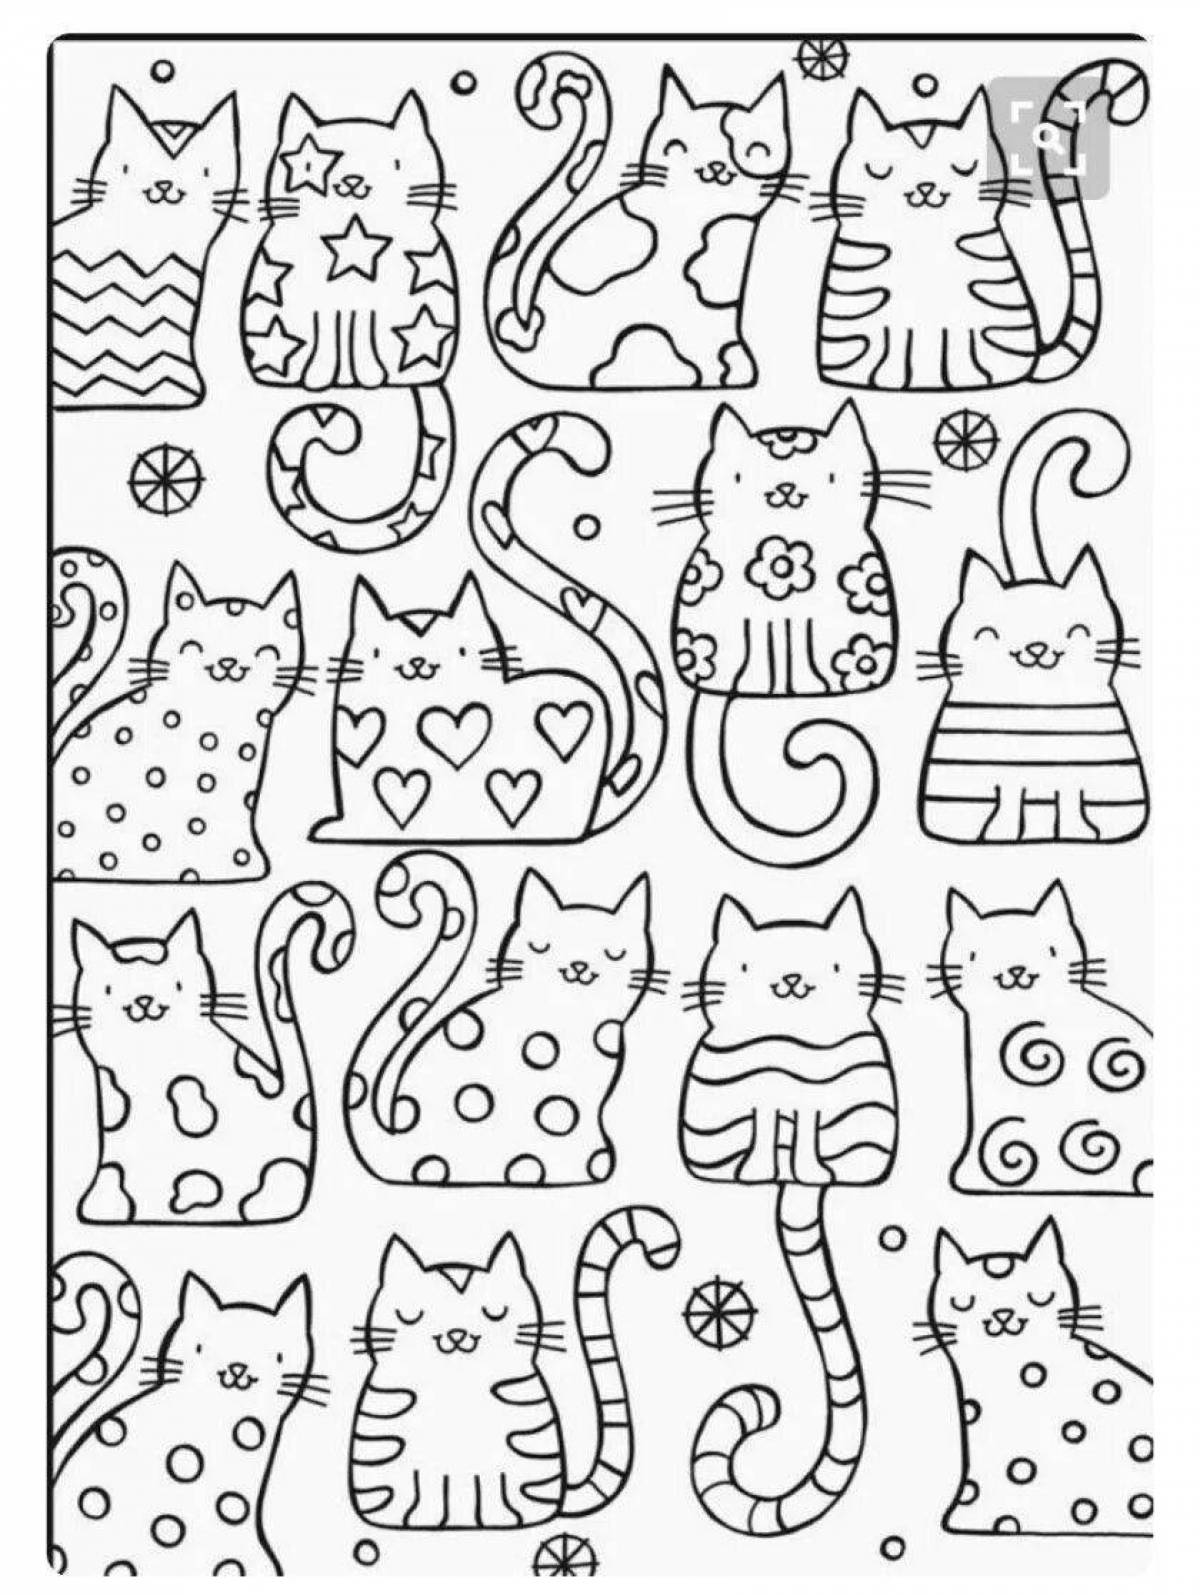 Little playful coloring book for children